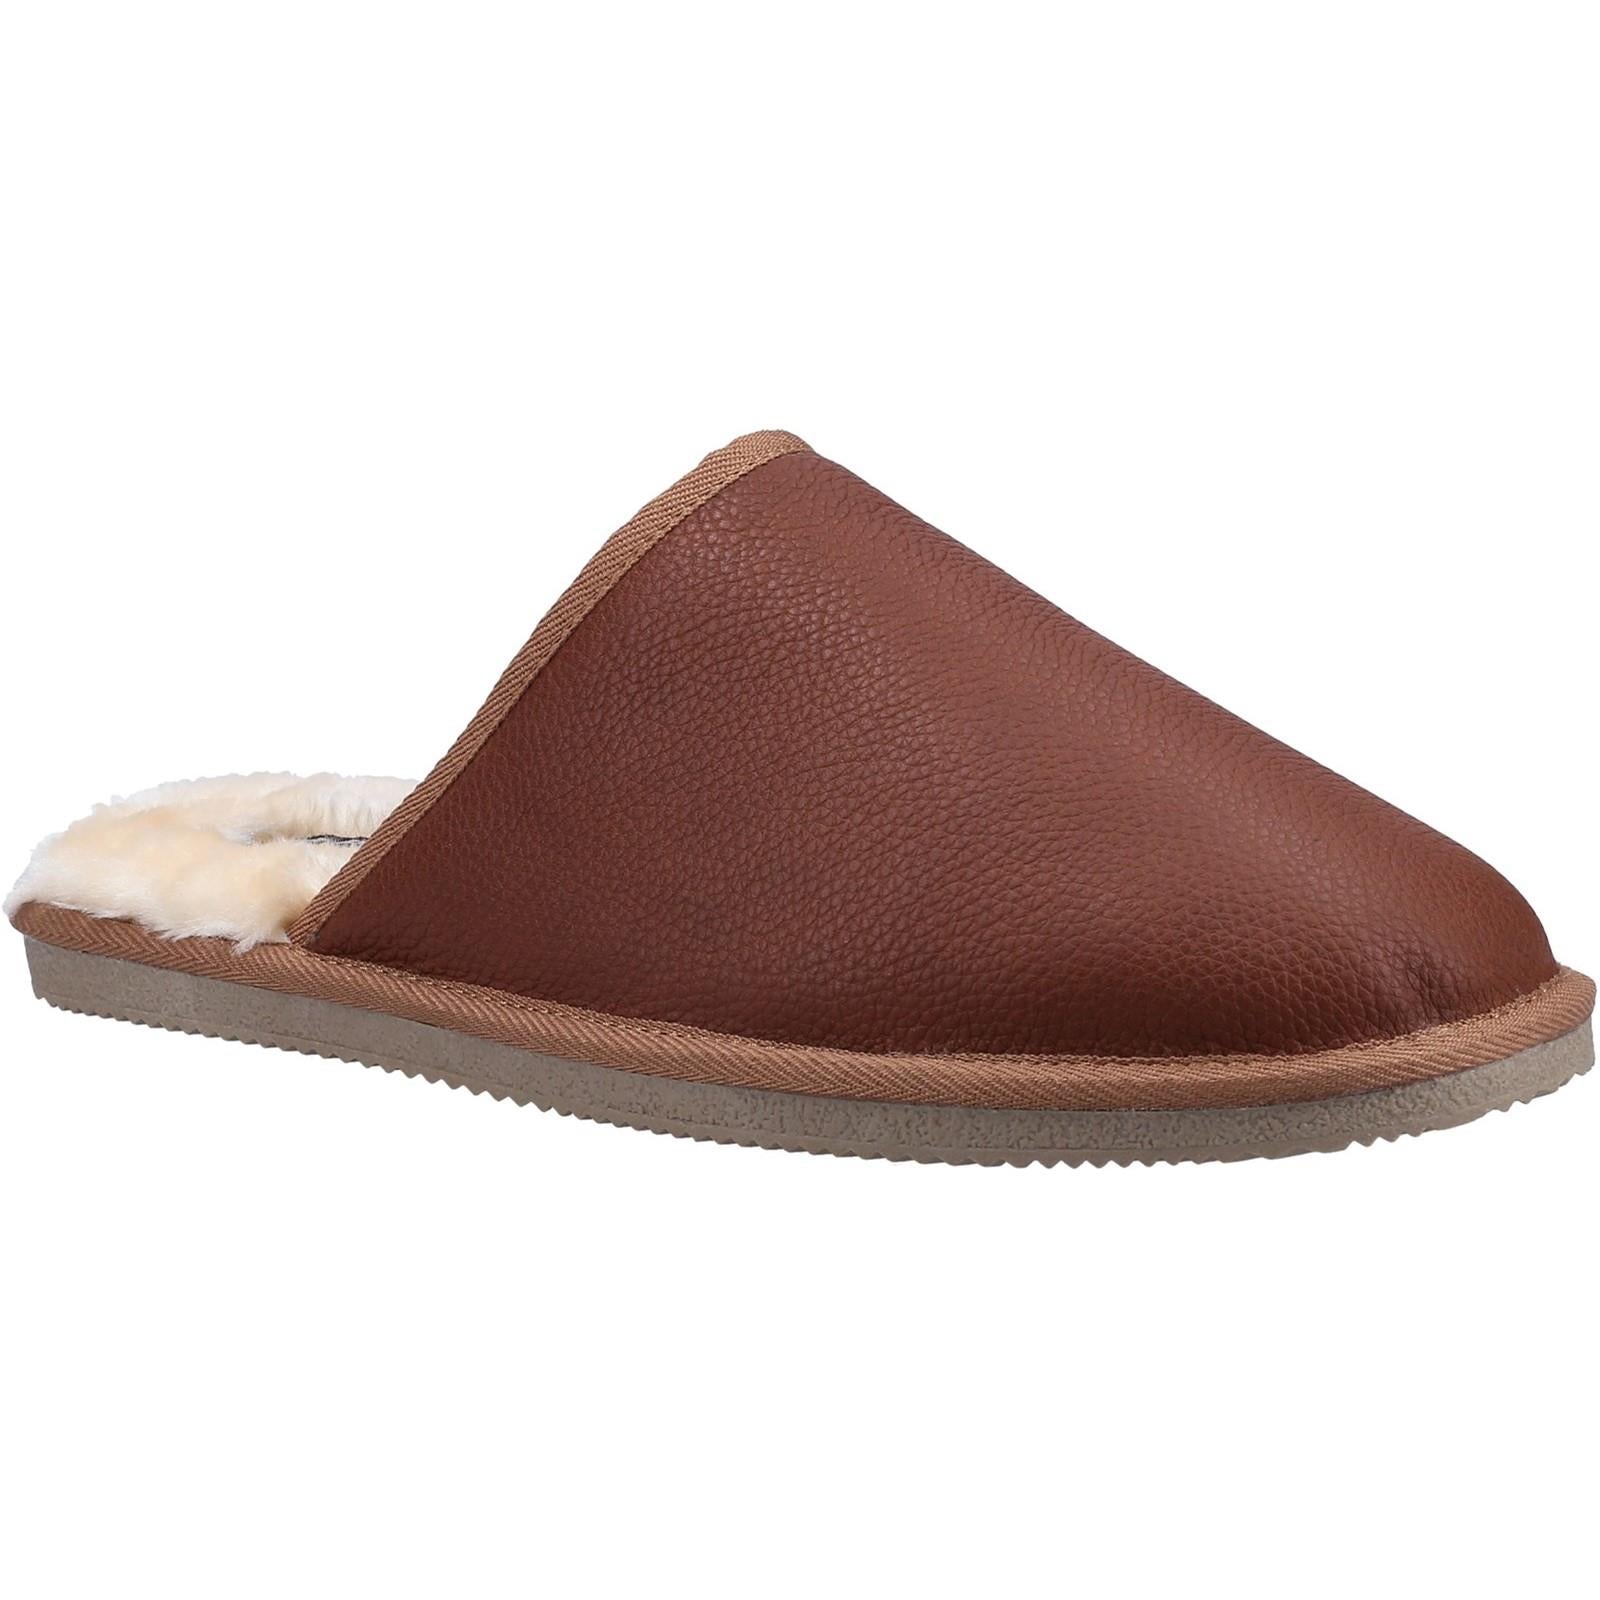 Hush Puppies Coady tan leather memory foam comfy fur lined slip on mule slippers